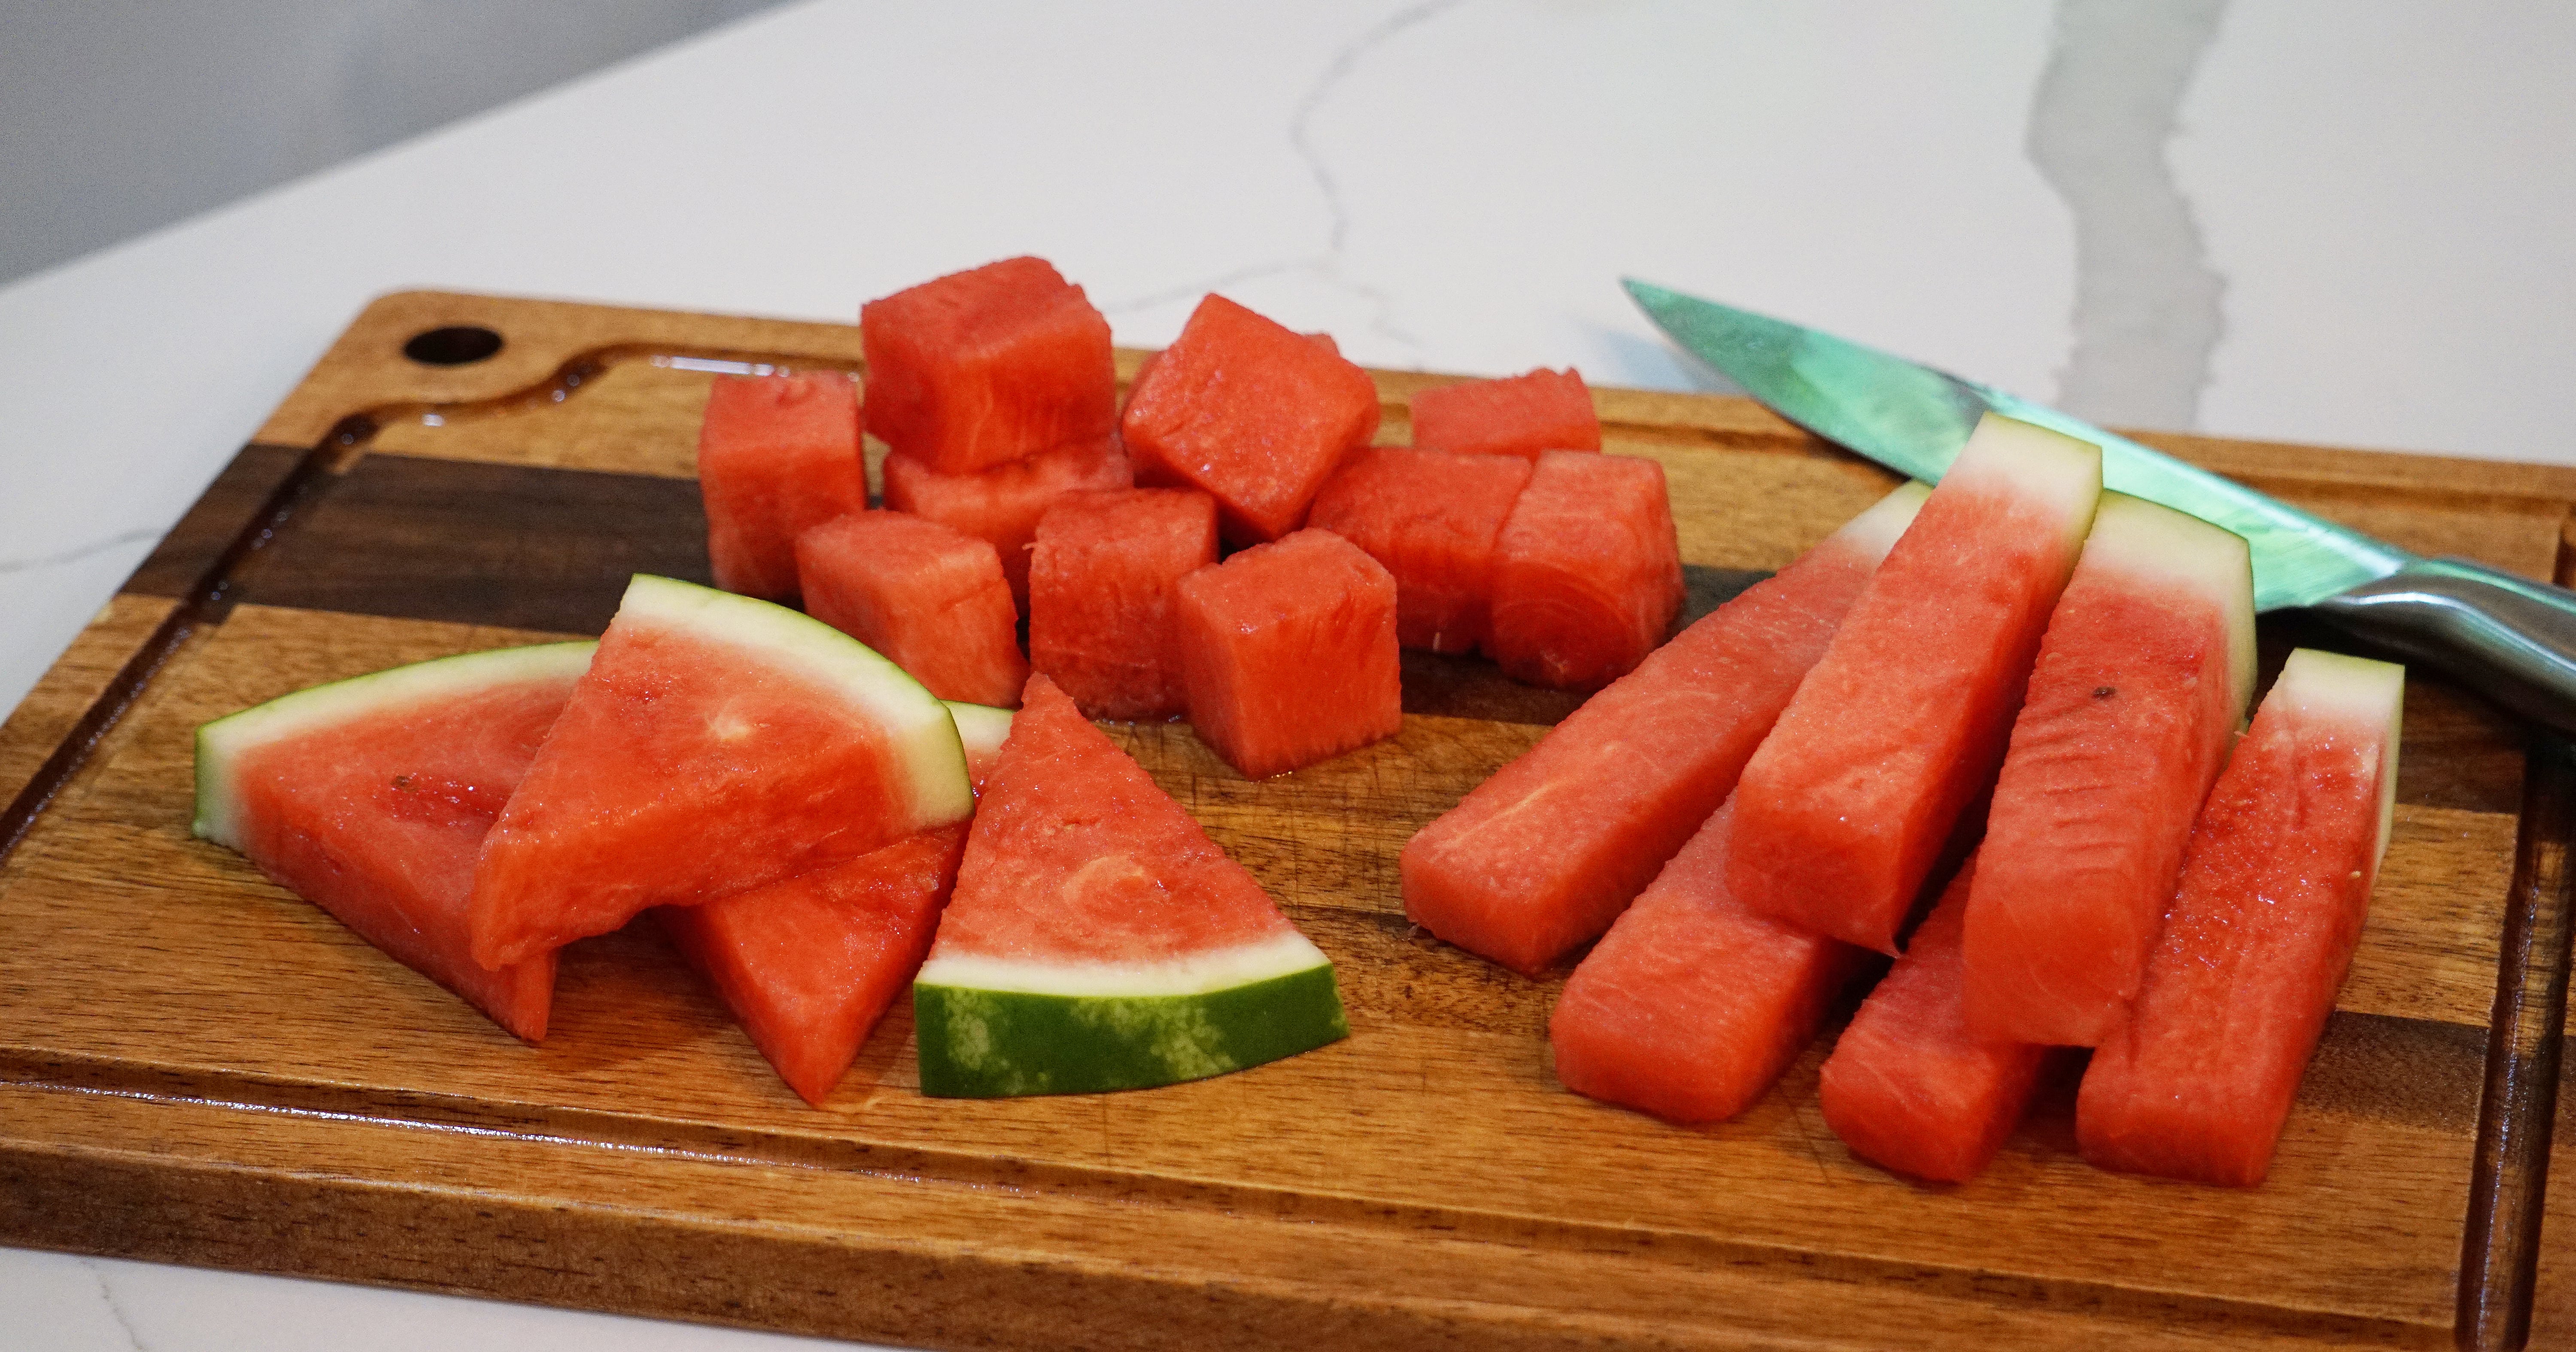 How to Cut a Watermelon: 3 Methods Anyone Can Master